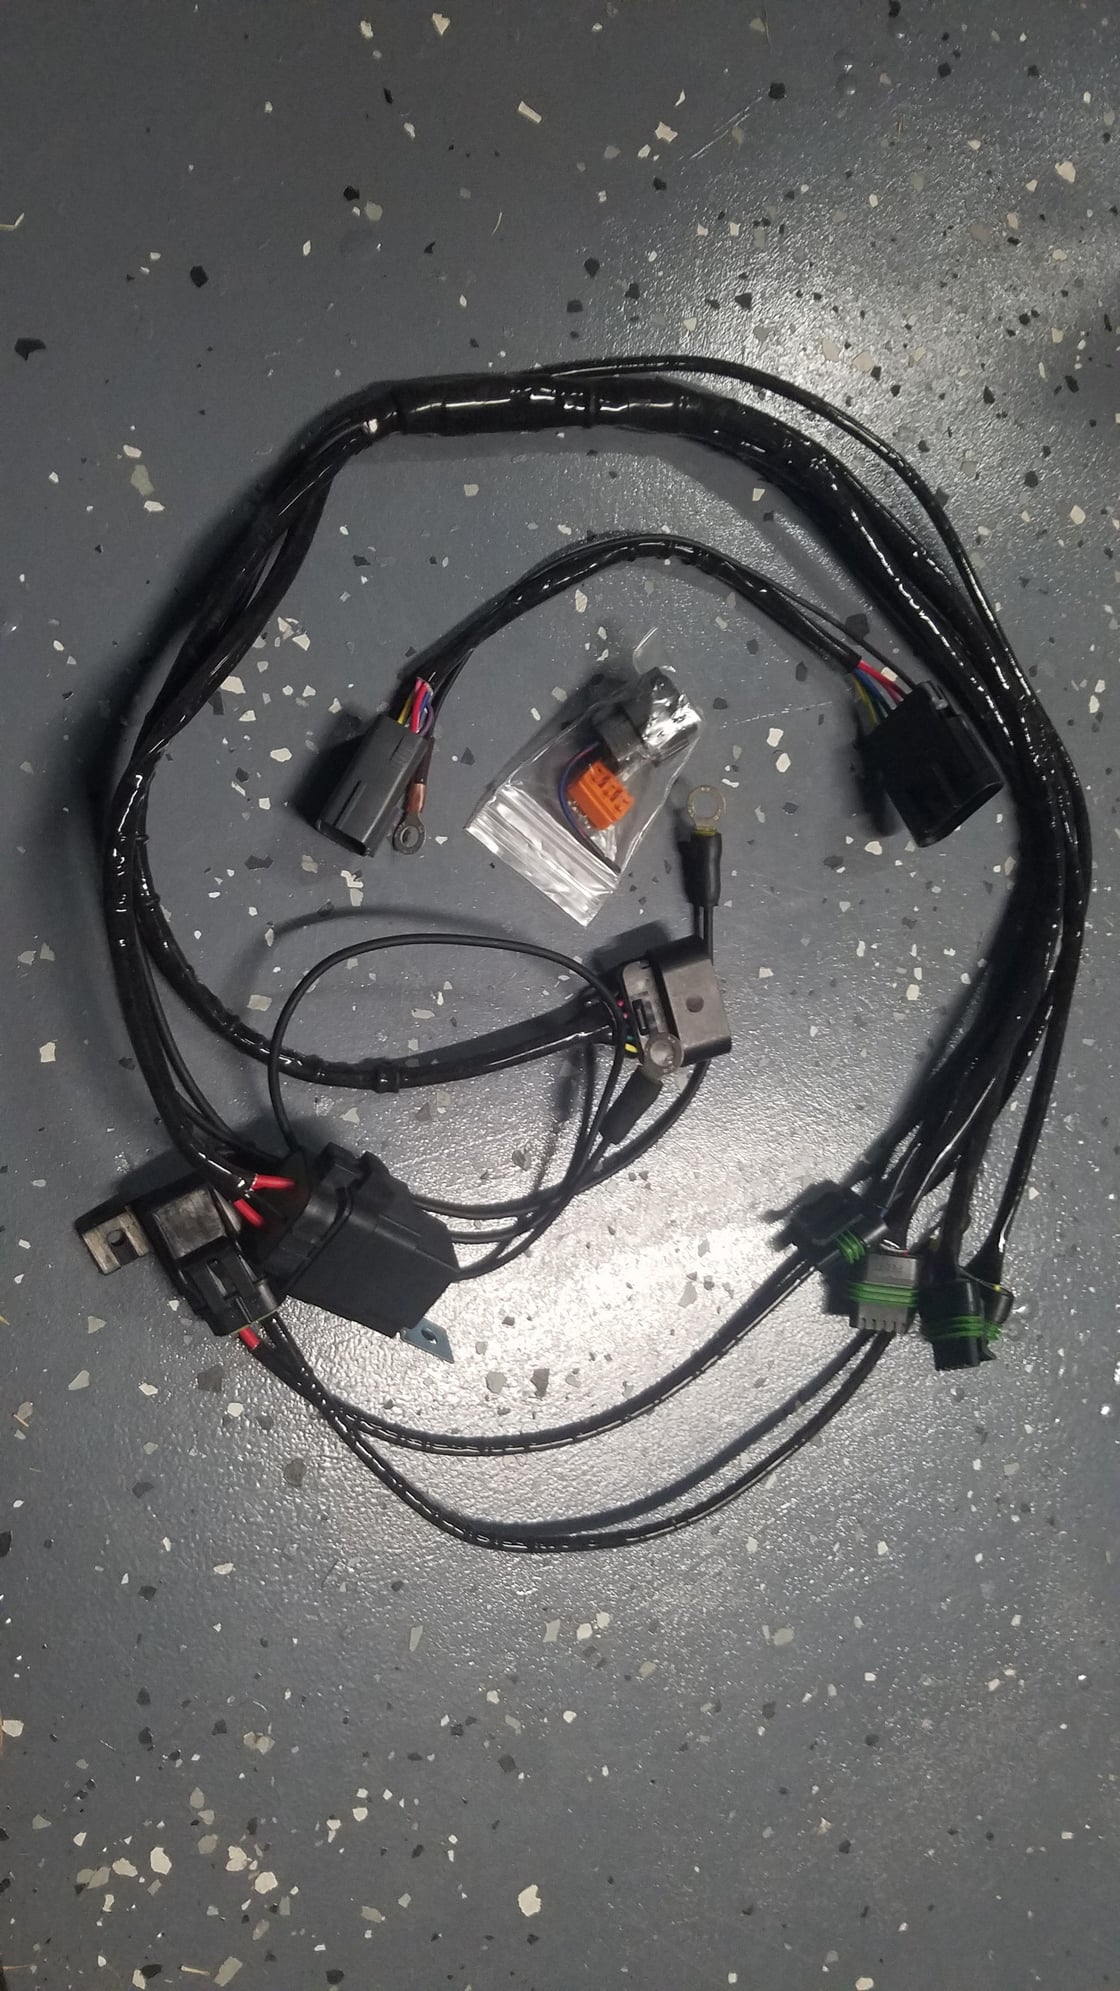 Engine - Electrical - Sakebomb IGN-1a coil wiring harness - New - 1993 to 1995 Mazda RX-7 - Buda, TX 78610, United States